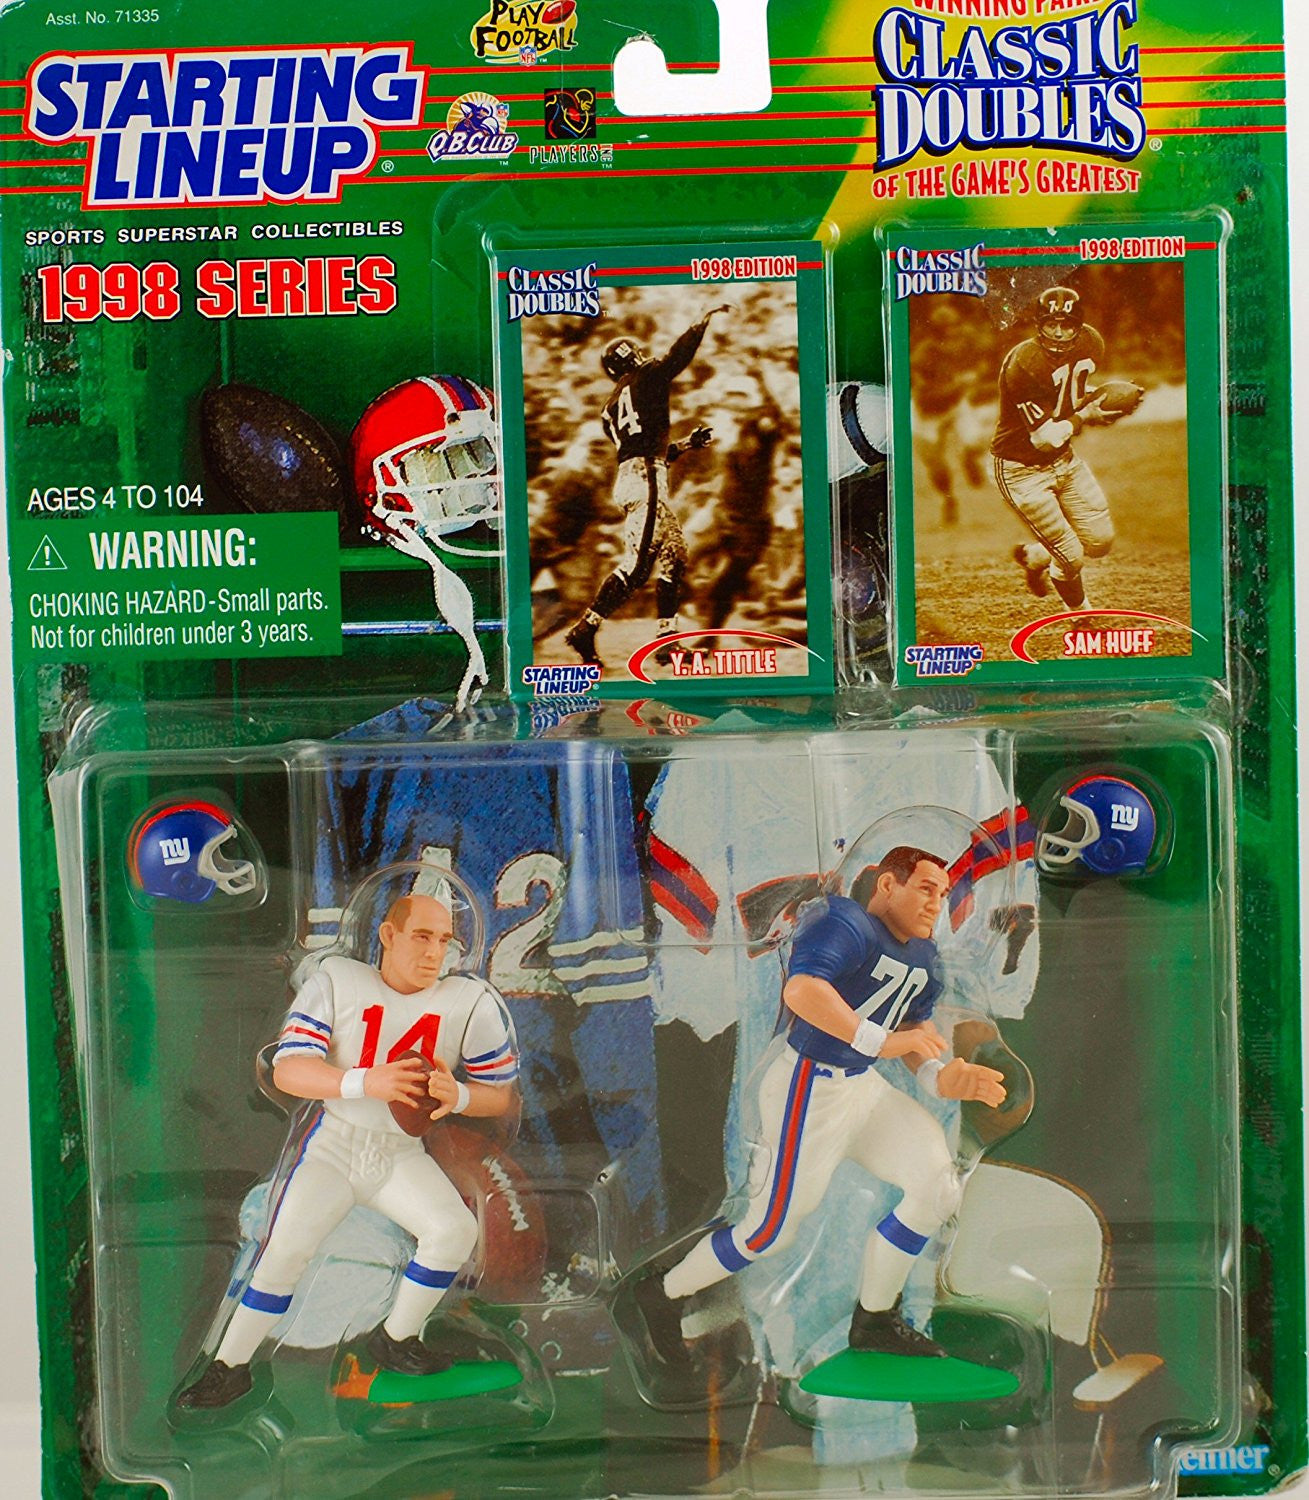 1998 Y.A. Tittle and Sam Huff NFL Classic Doubles Starting Lineup Figures